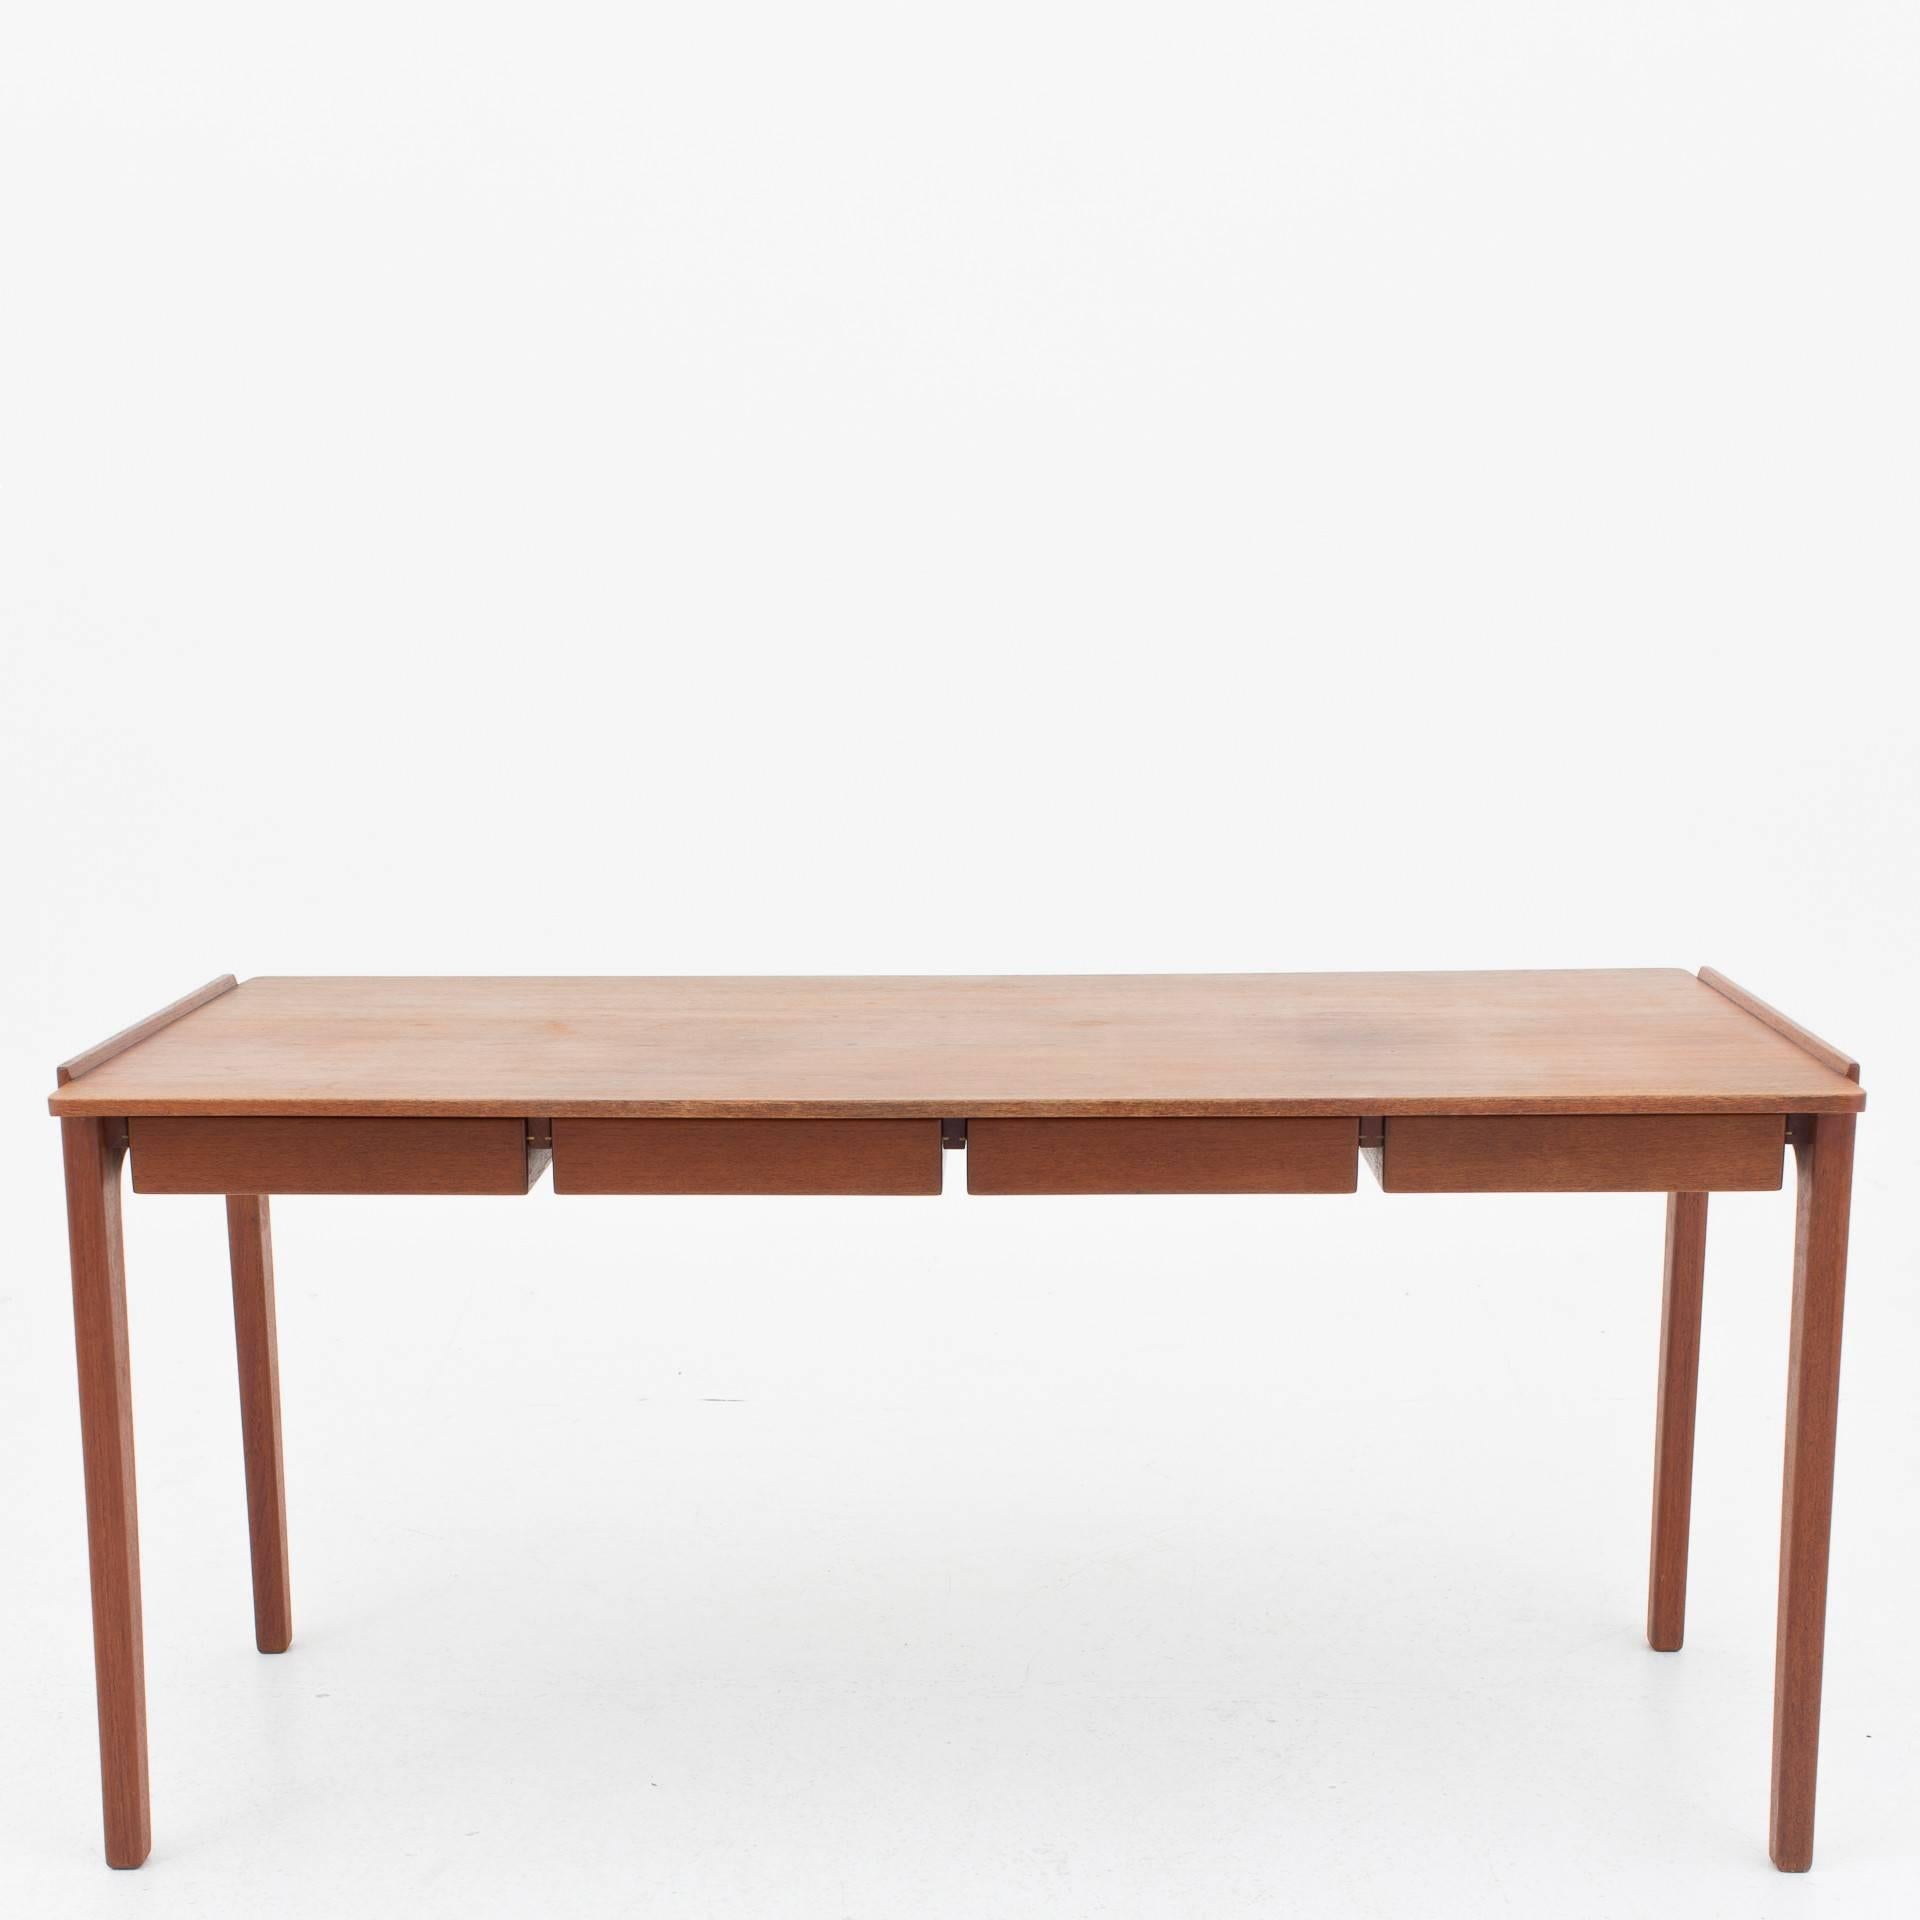 Writing desk in teak, front with four drawers. Designed by Tove & Edvardt Kindt-Larsen by cabinetmaker Thorald Madsen.